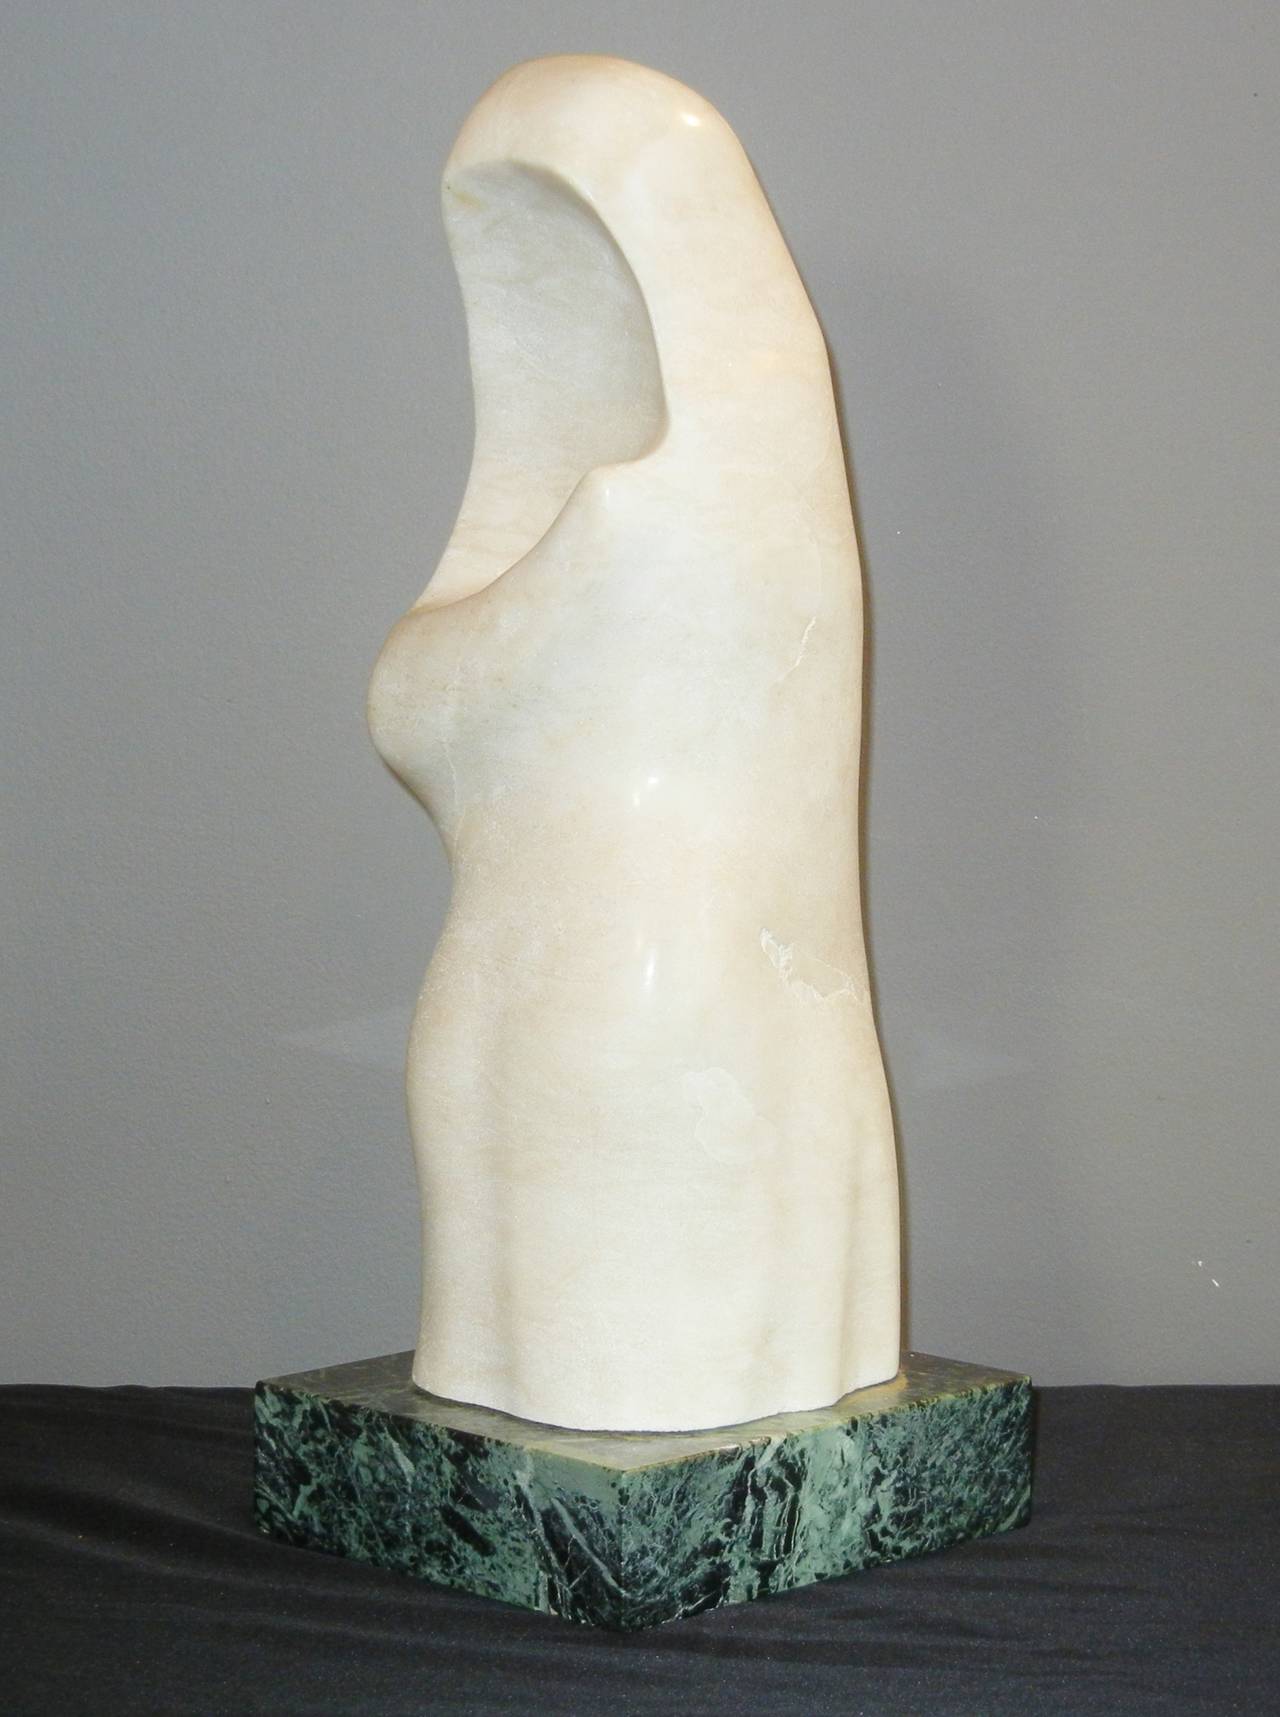 This post-modern marble abstract sculpture suggests a mother and child, while it is interesting to view from any angle. The vague pose and draping attire suggest mystery and protection, while the white of the stone implies serenity, purity and the